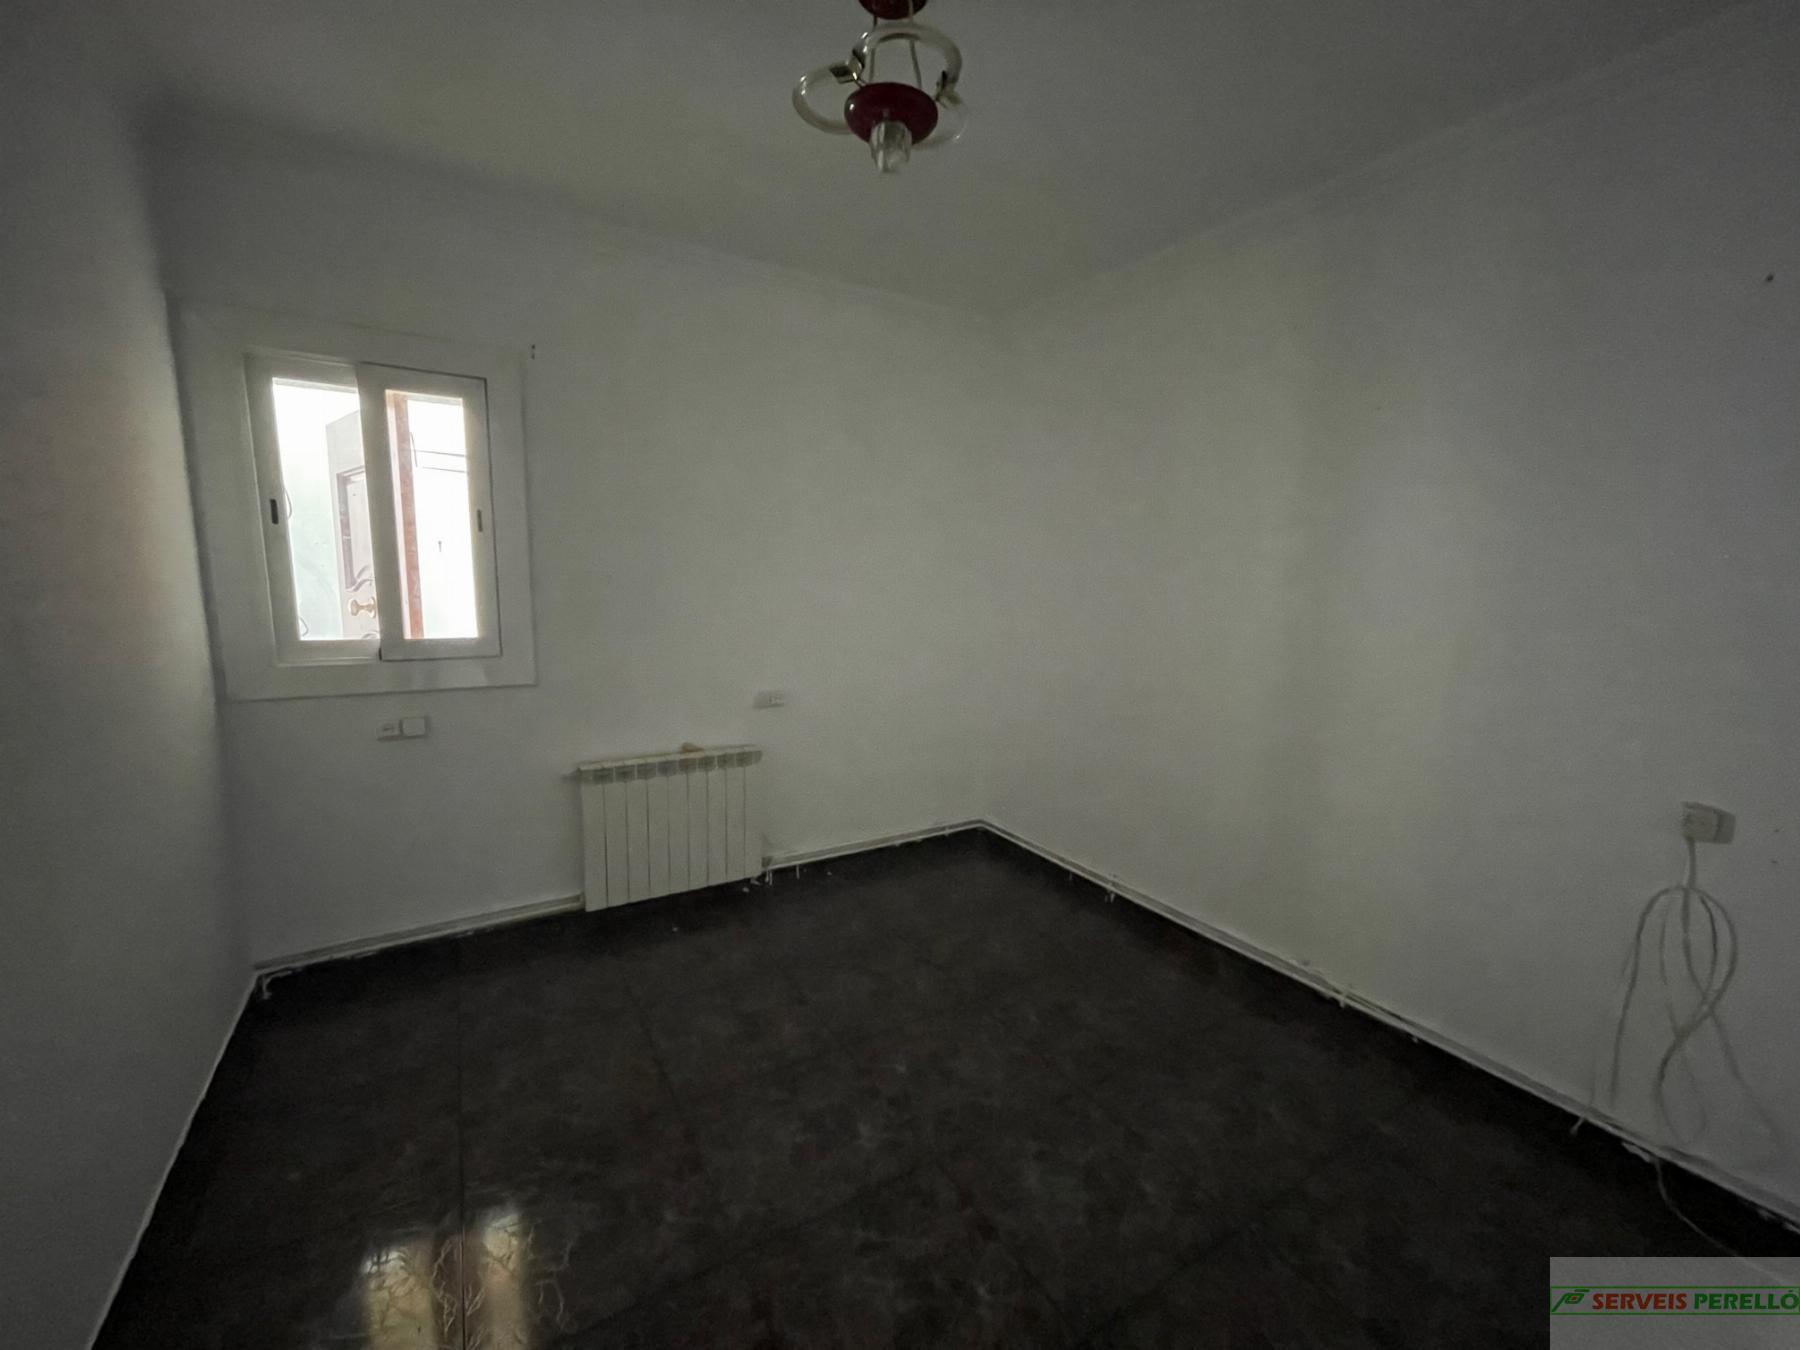 For sale of apartment in Mollerussa